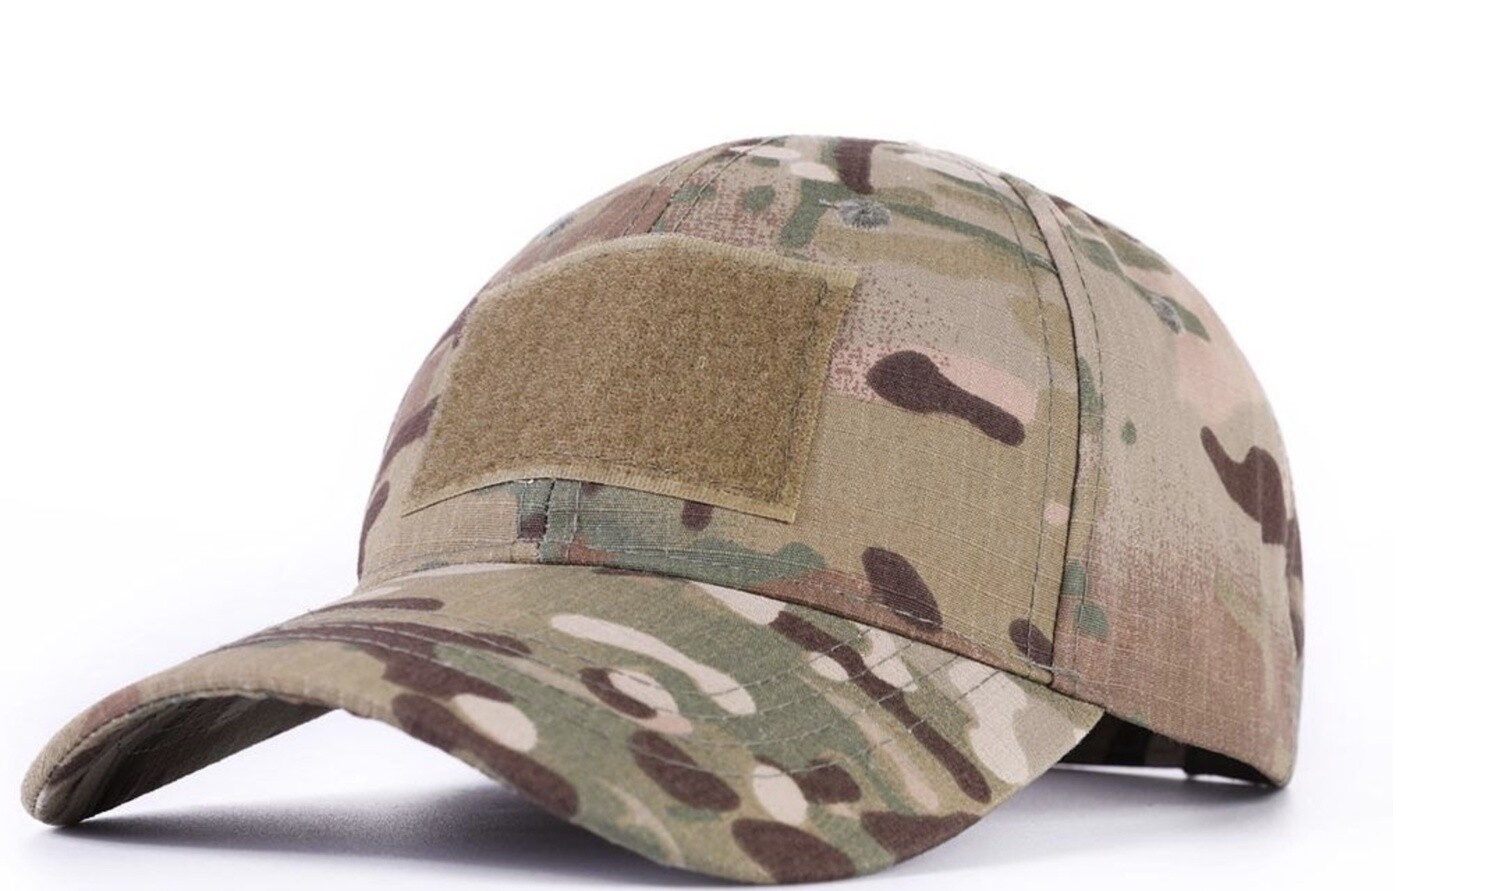 CAMPING OUTDOOR SPORT SNAP BACK TACTICAL MILITARY ARMY CAMO CAP - BROWN